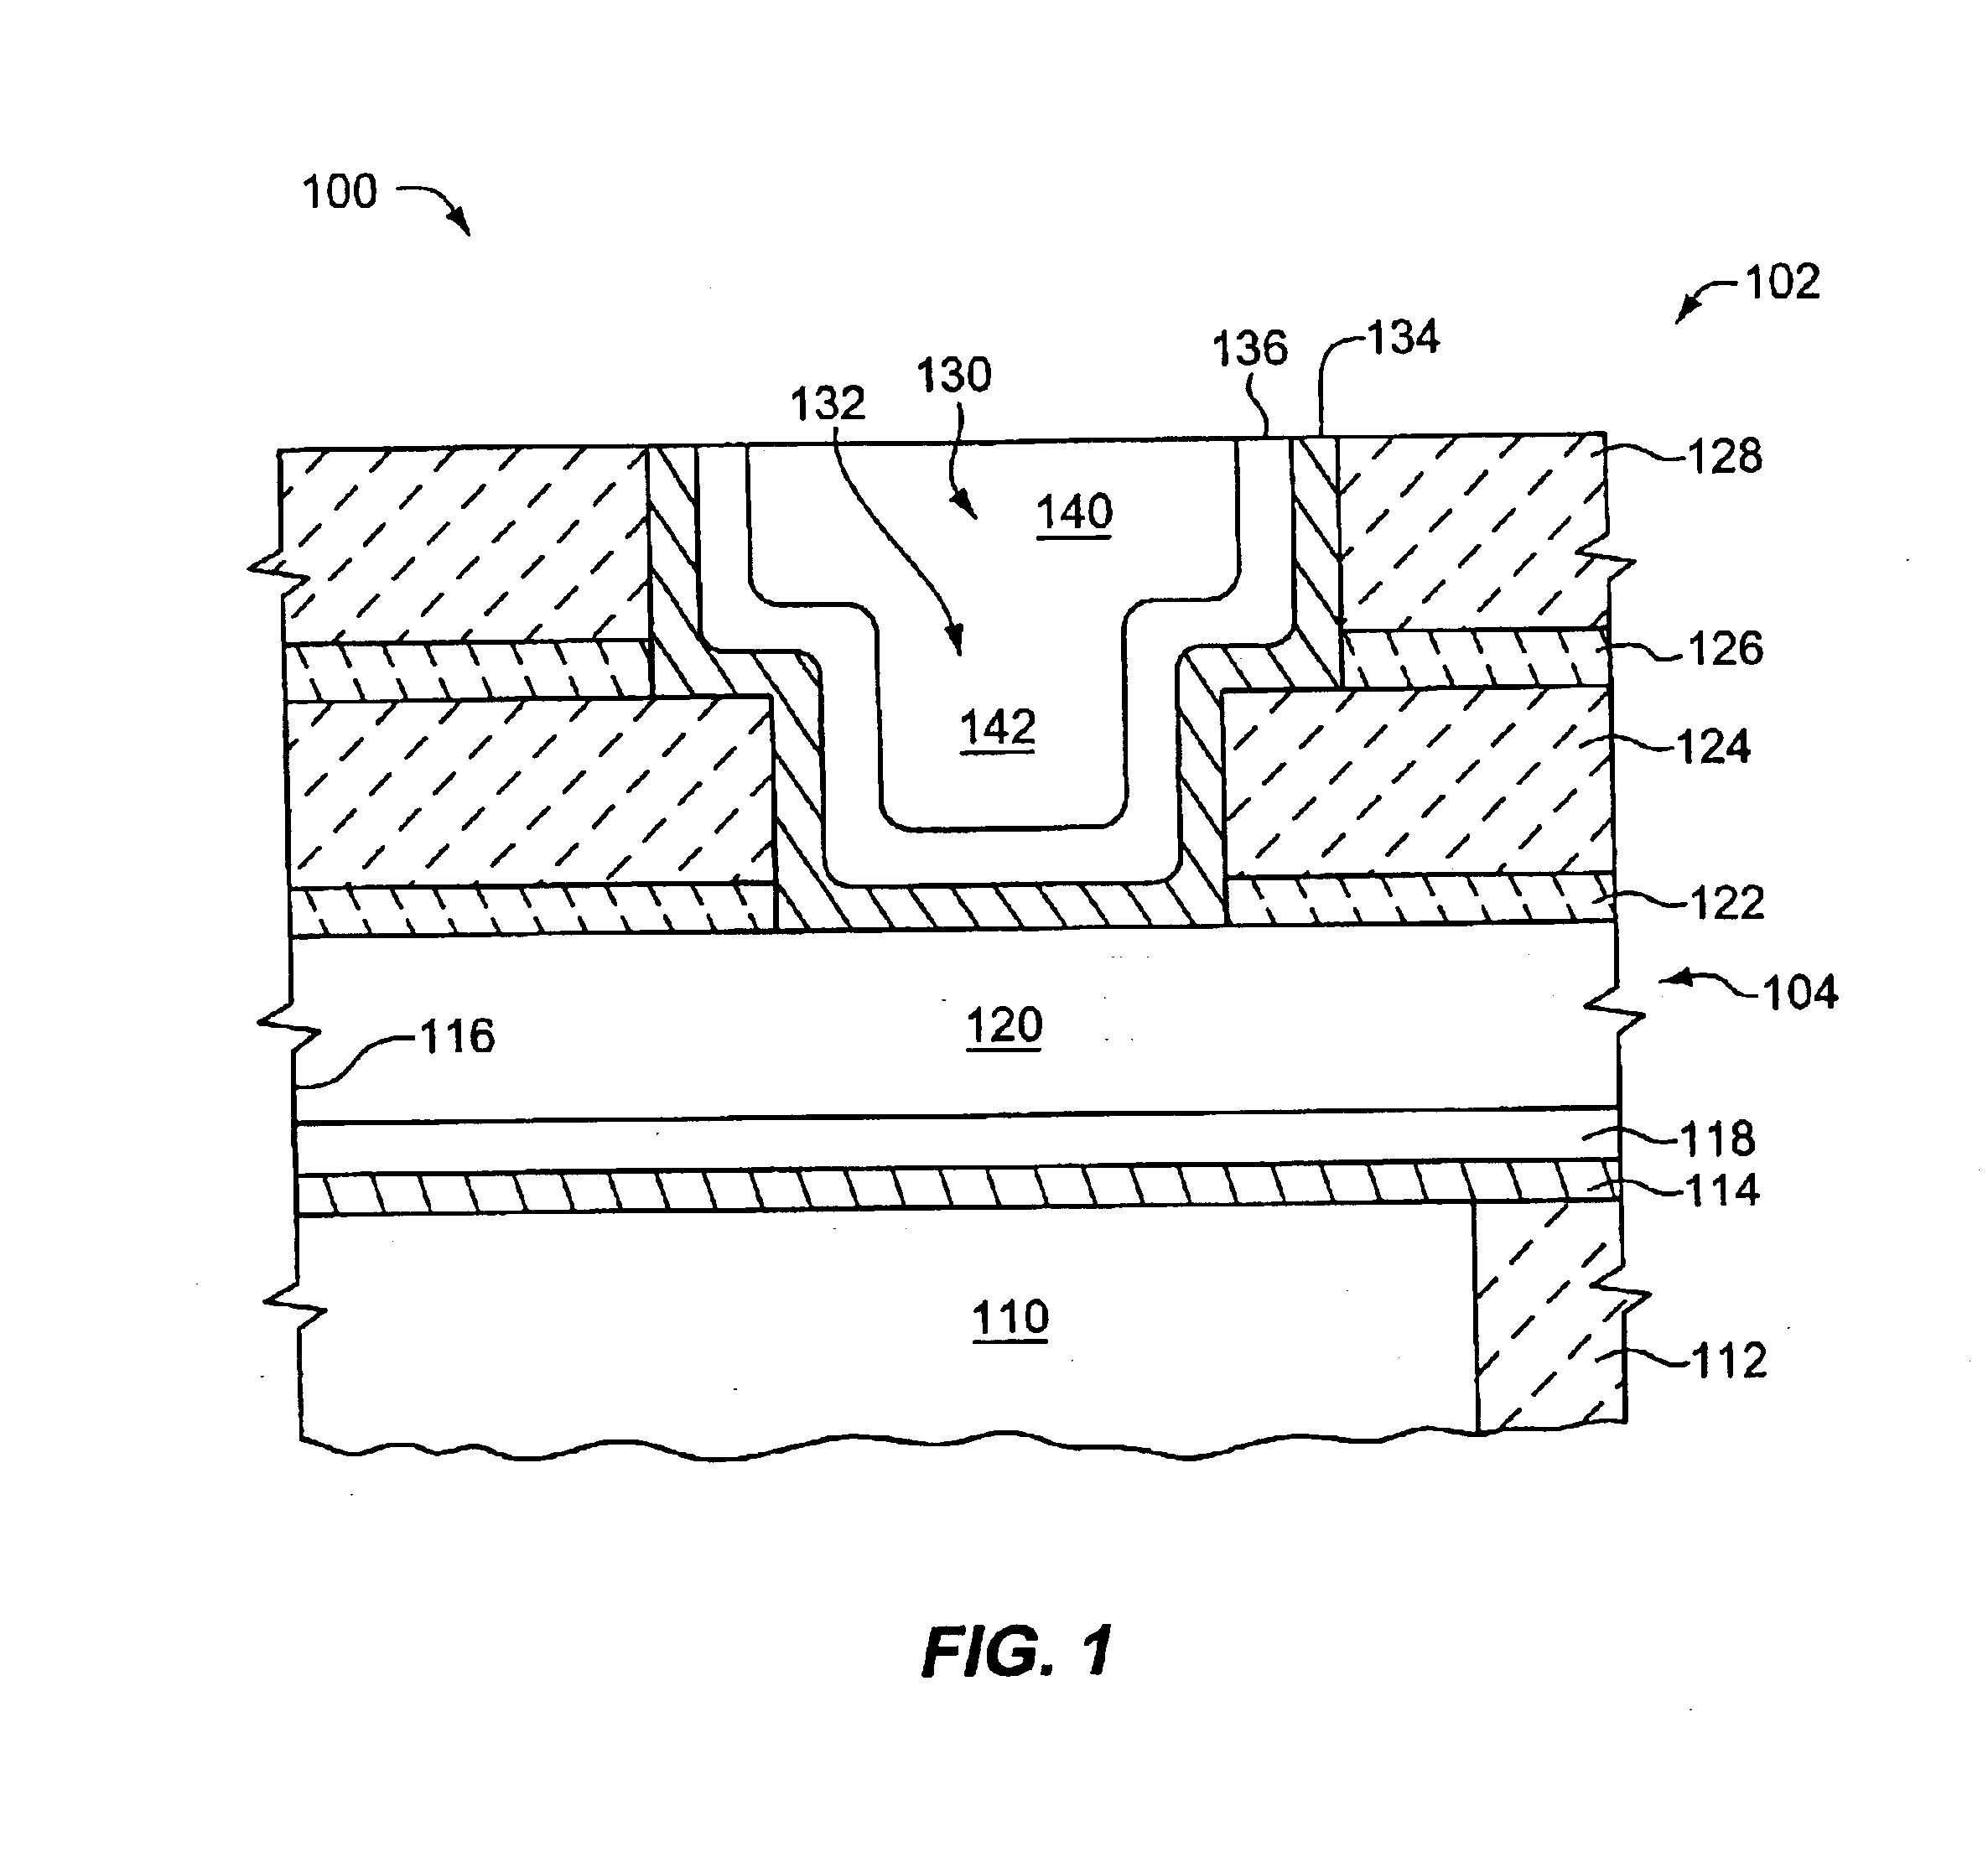 Electroplating using DC current interruption and variable rotation rate